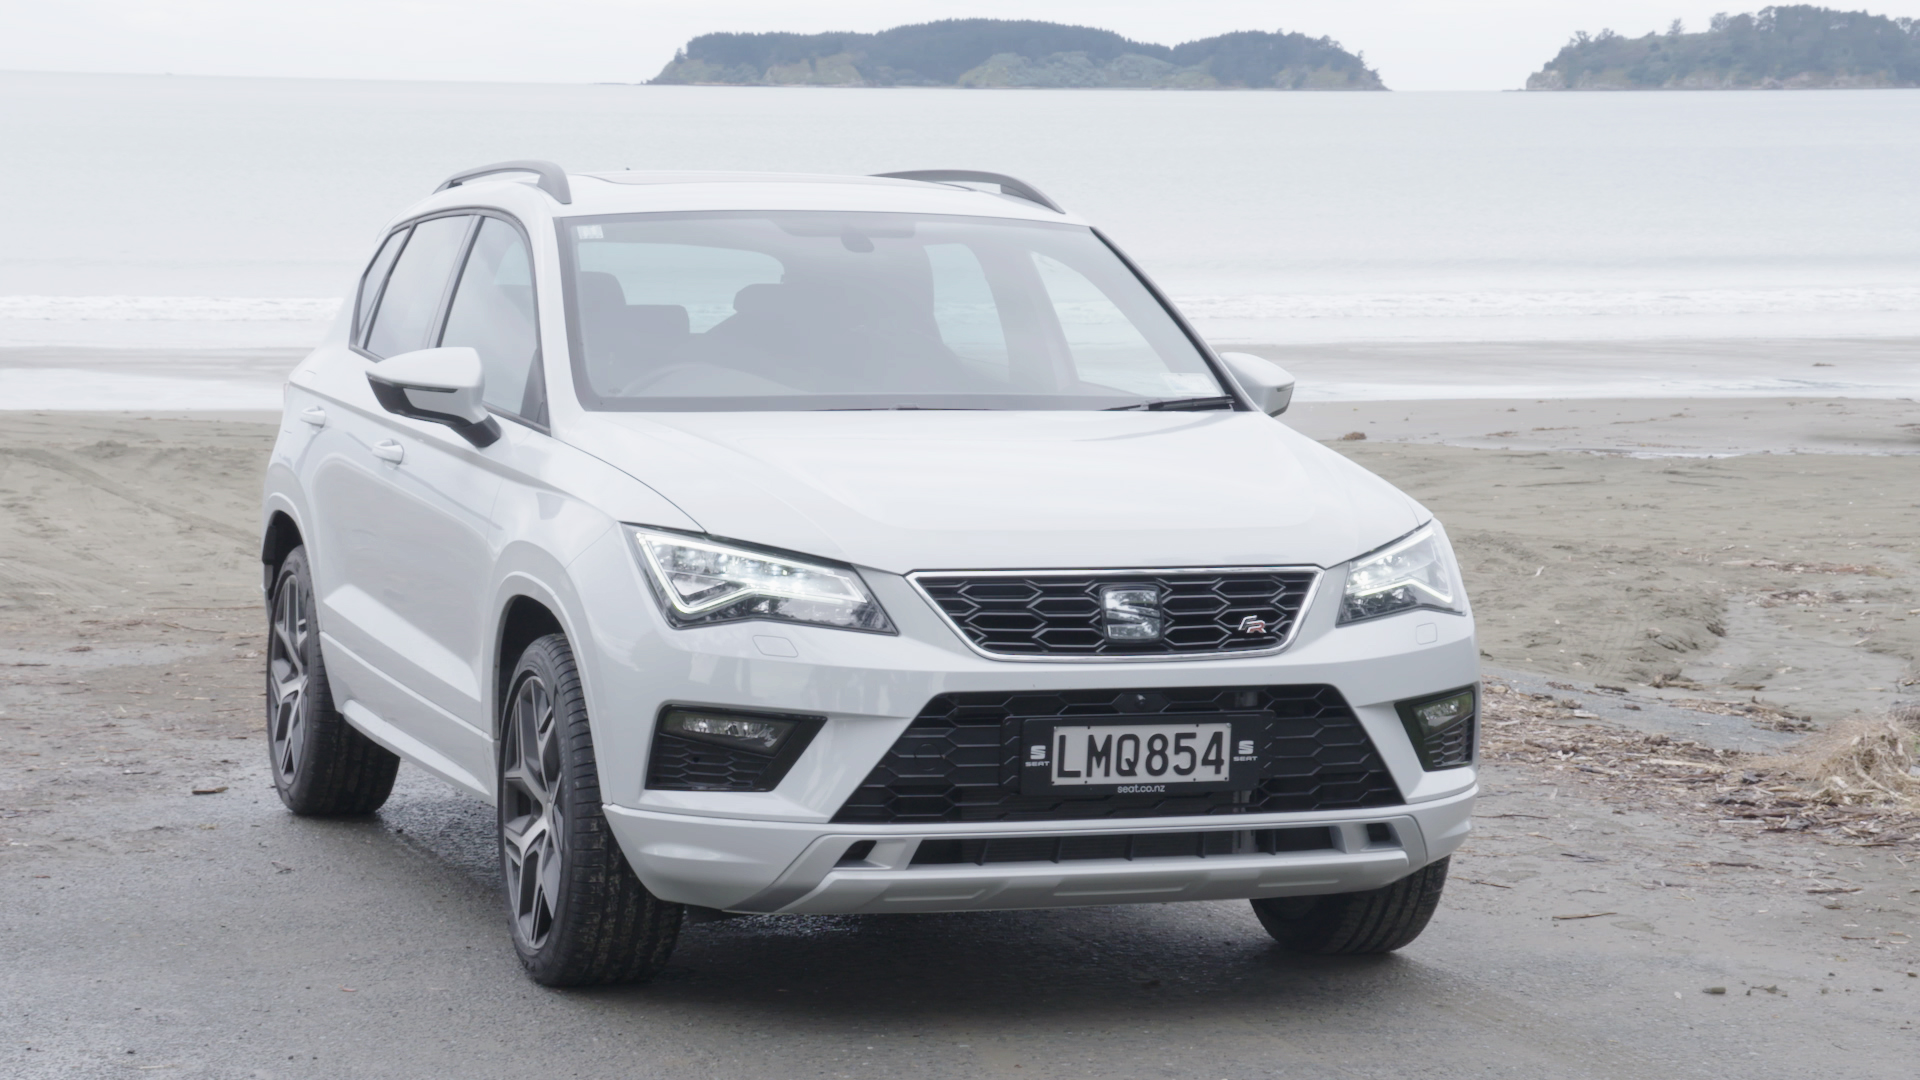 2018 SEAT Ateca FR - Video Road Report | NZ SUV | Which SUV in NZ